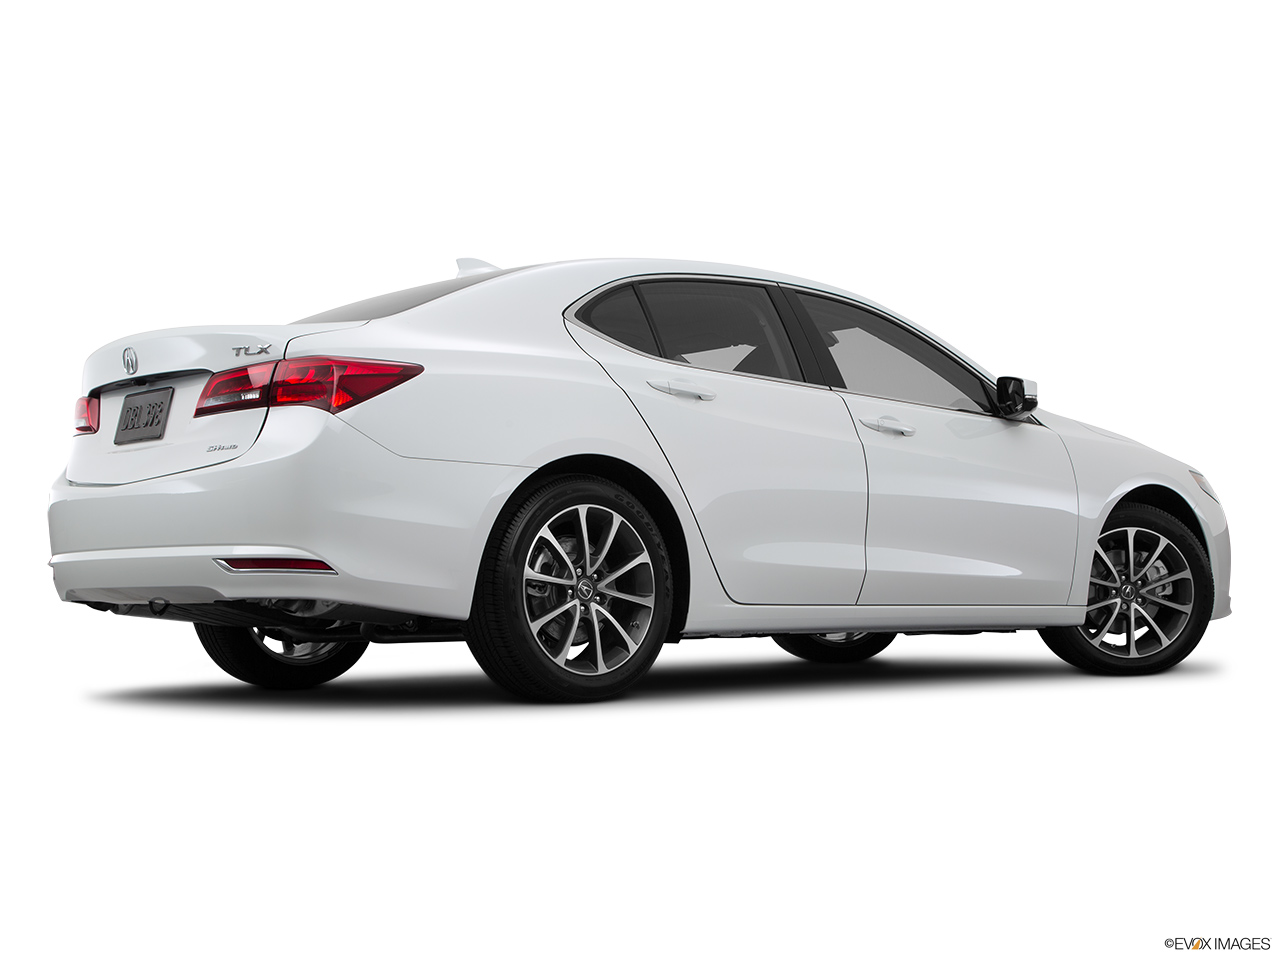 2015 Acura TLX 3.5 V-6 9-AT SH-AWD Low/wide rear 5/8. 